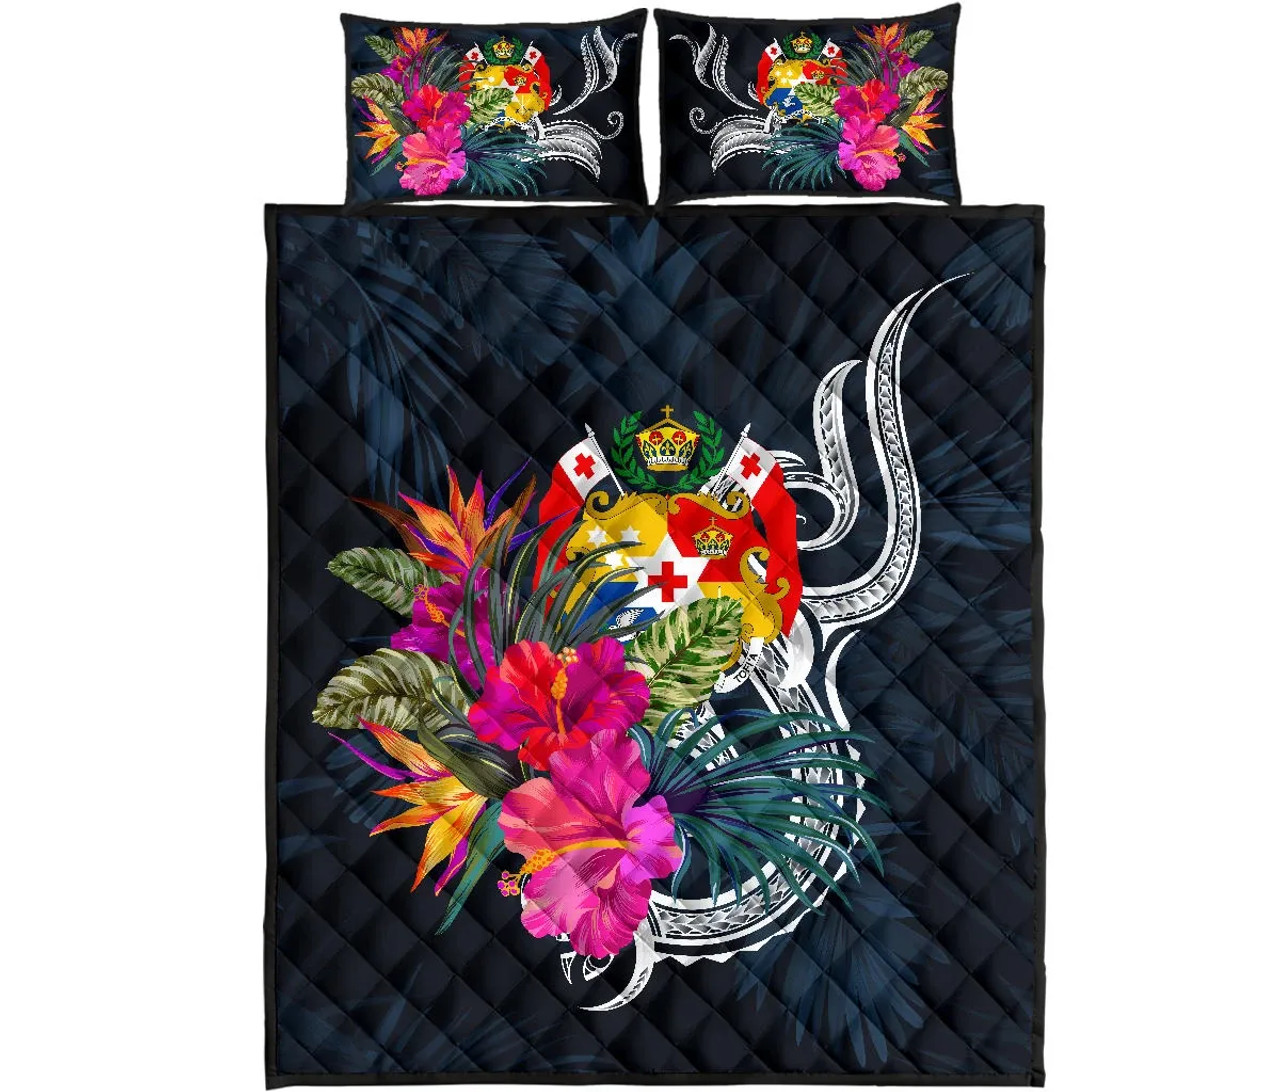 Tonga Polynesian Quilt Bed Set - Tropical Flower 5